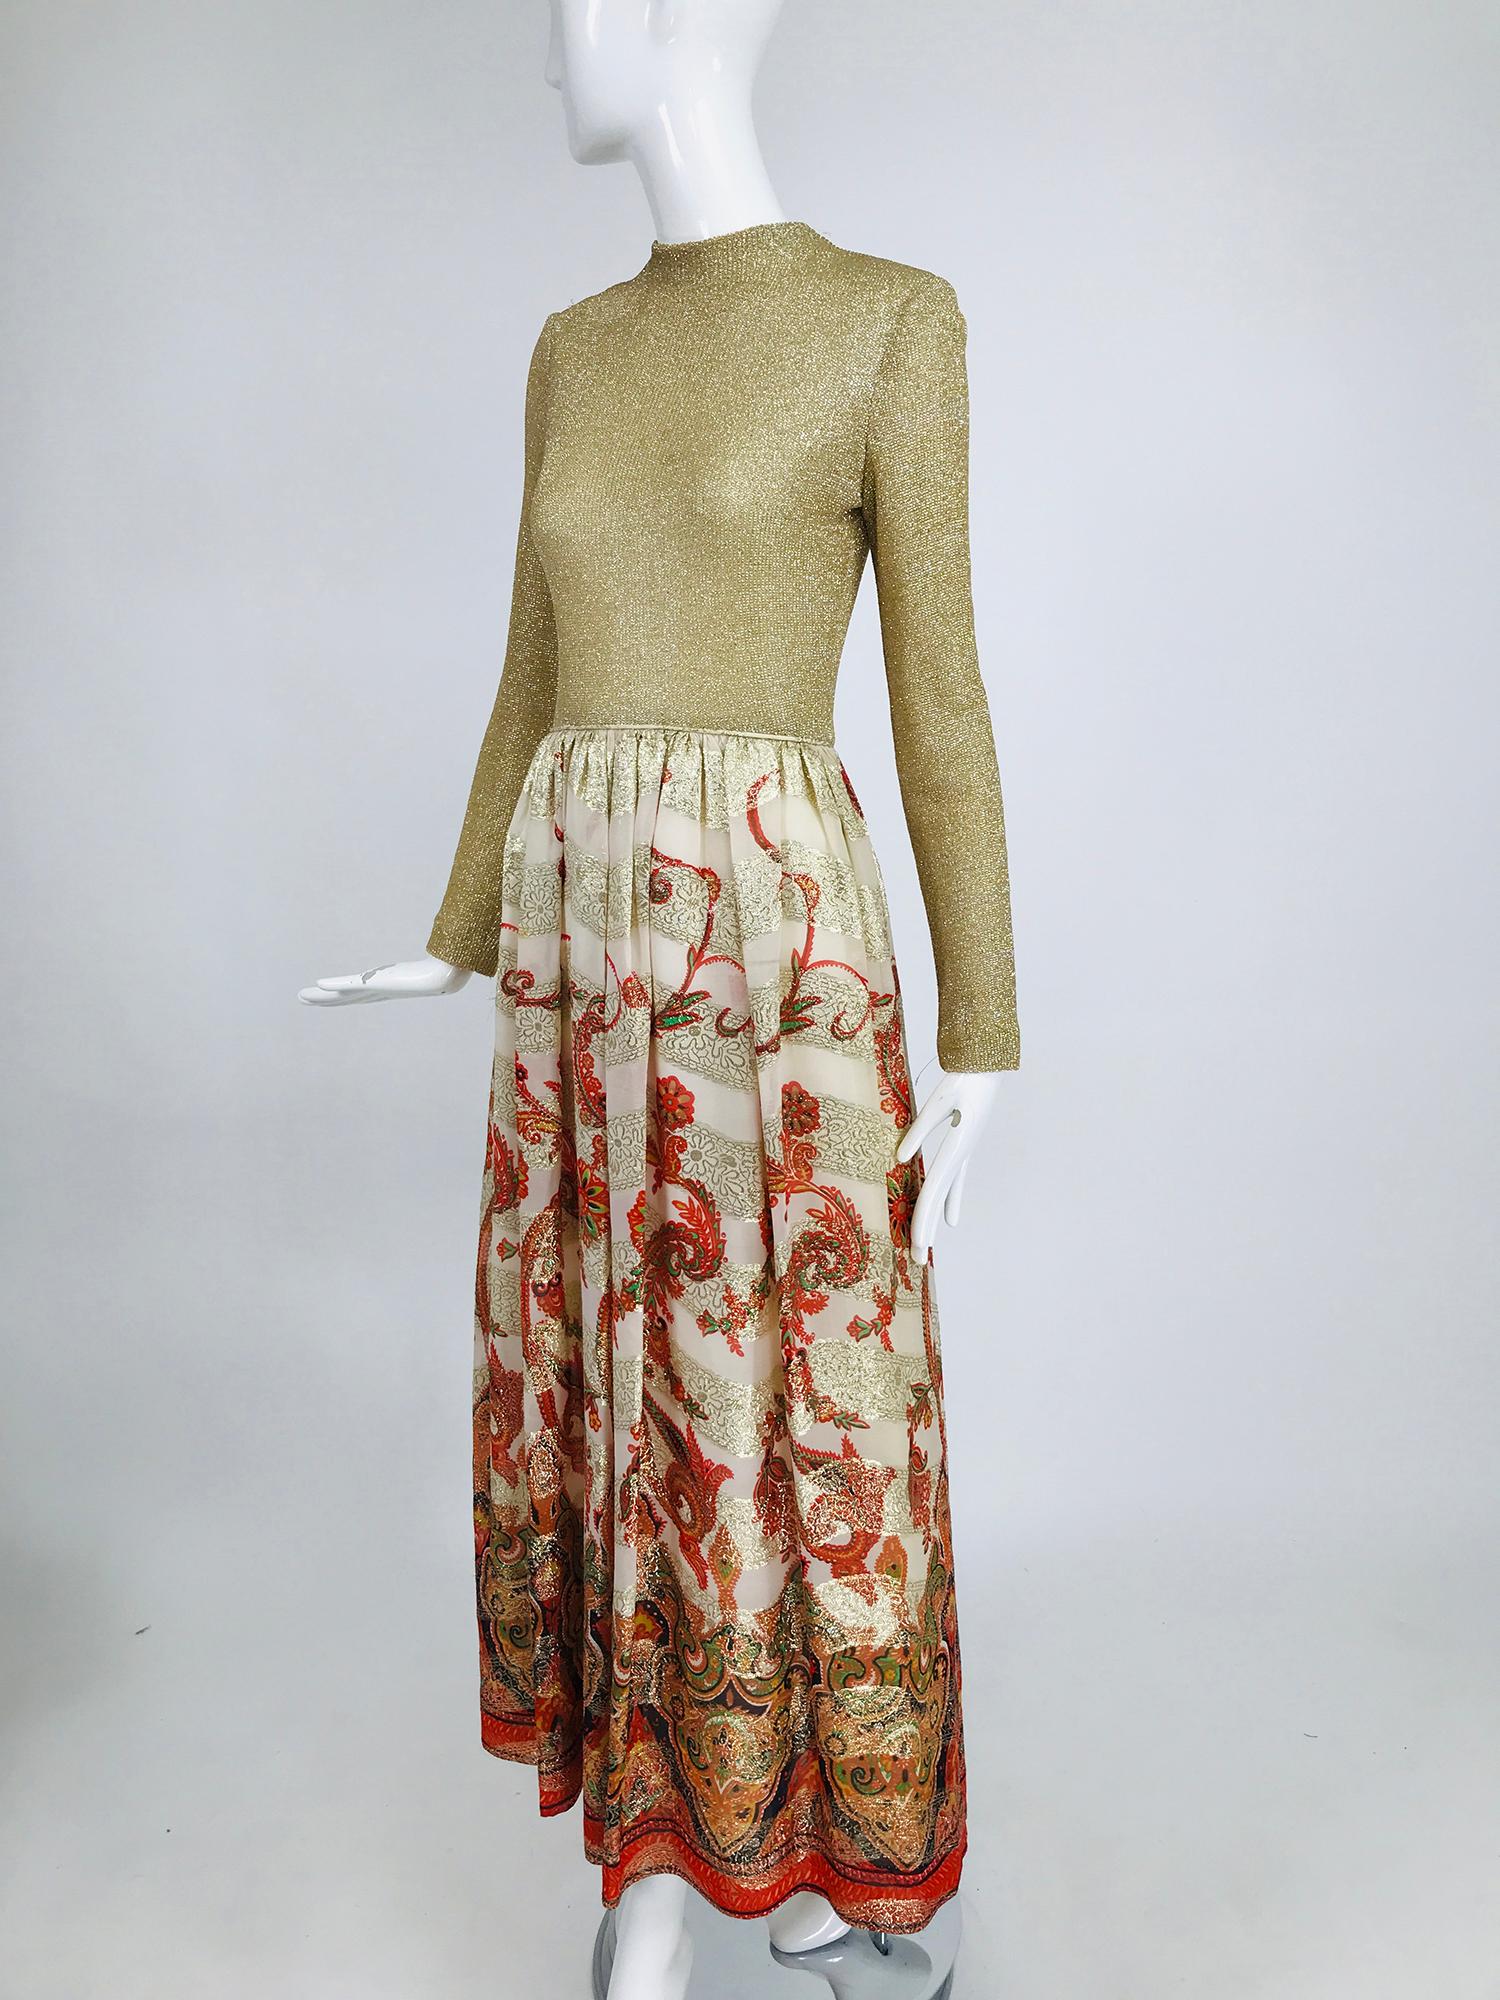 Vintage 1970s Saks Fifth Ave. gold metallic knit and coral brocade maxi dress. Mock neck, fitted bodice, long sleeve top with a narrow welt cord waist band, the long skirt is woven of gold metallic chiffon brocade, with floral swirls of coral and